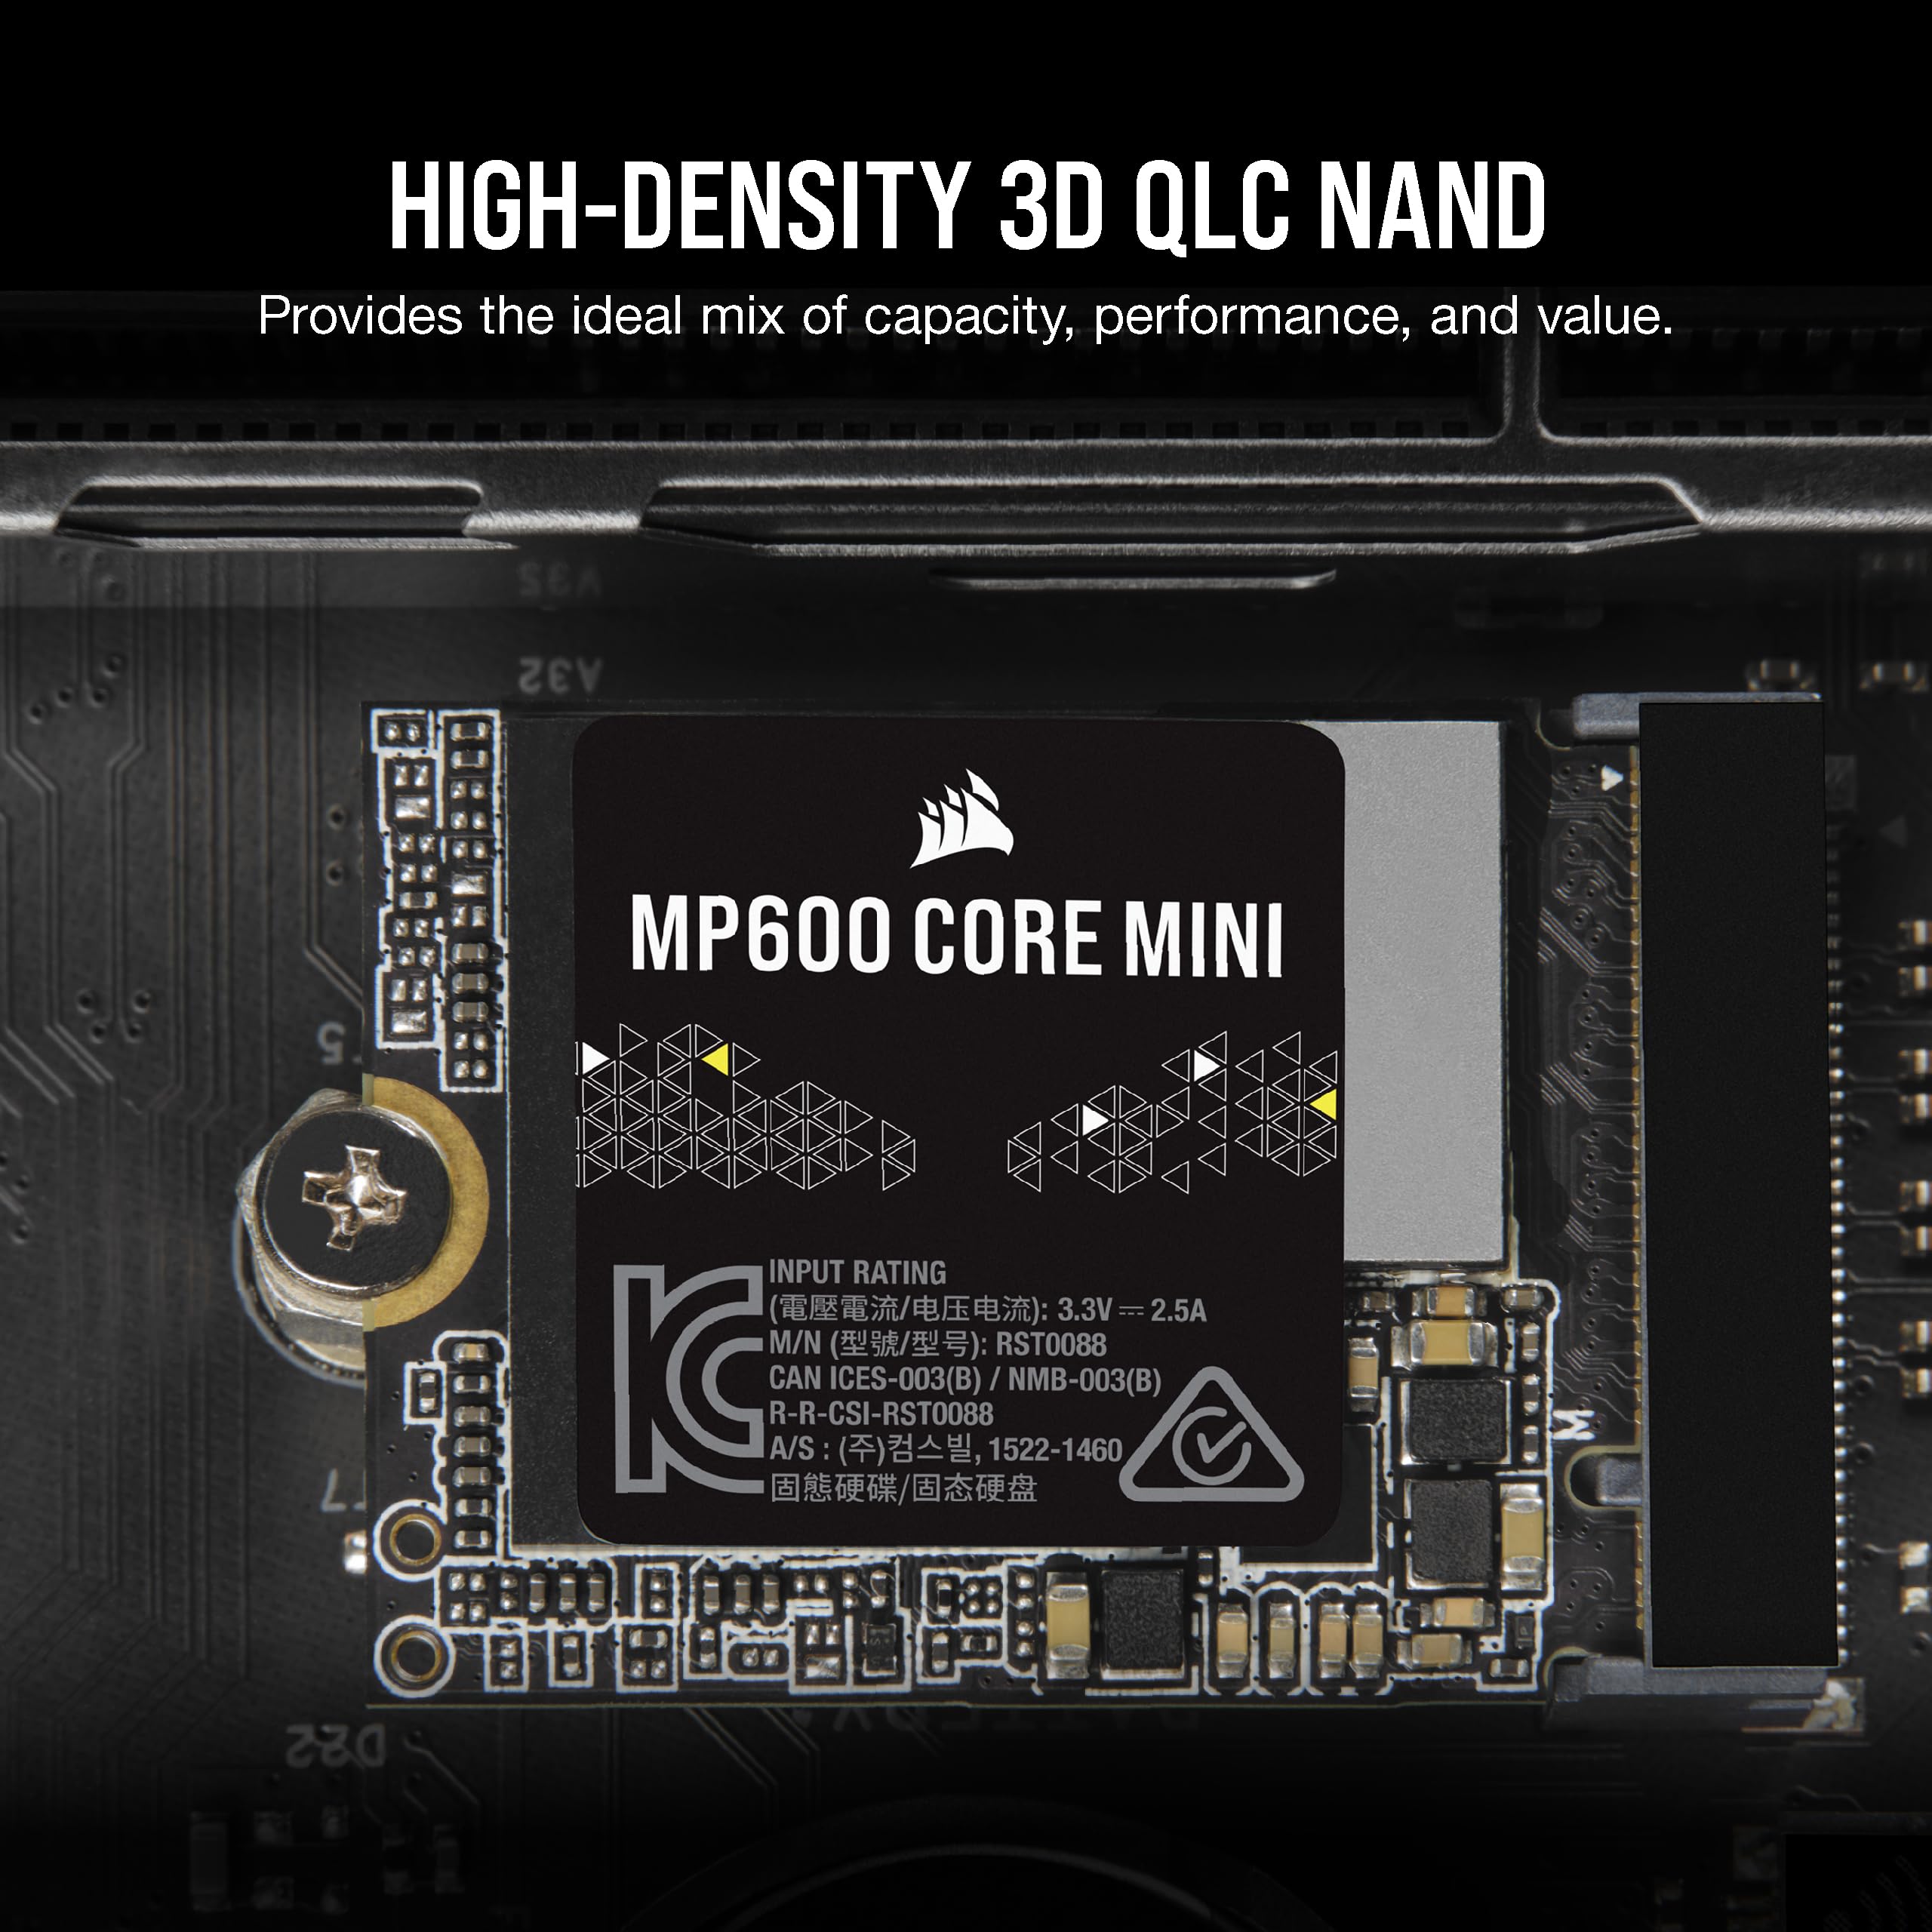 Corsair MP600 CORE Mini 1TB M.2 NVMe PCIe x4 Gen4 2 SSD – M.2 2230 – Up to 5,000MB/sec Sequential Read – High-Density QLC NAND – Great for Steam Deck, ASUS ROG Ally, Microsoft Surface Pro – Black